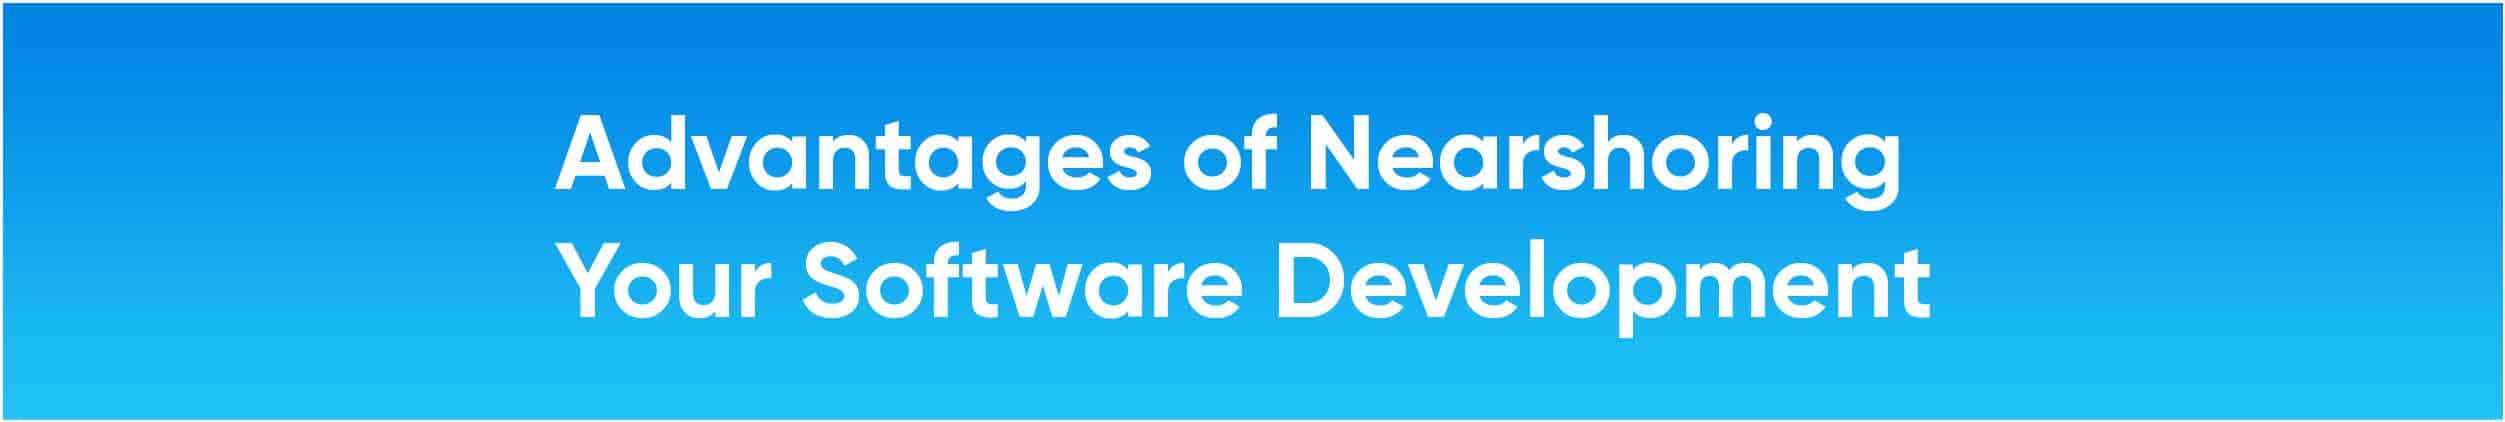 Advantages of Nearshoring Your Software Development